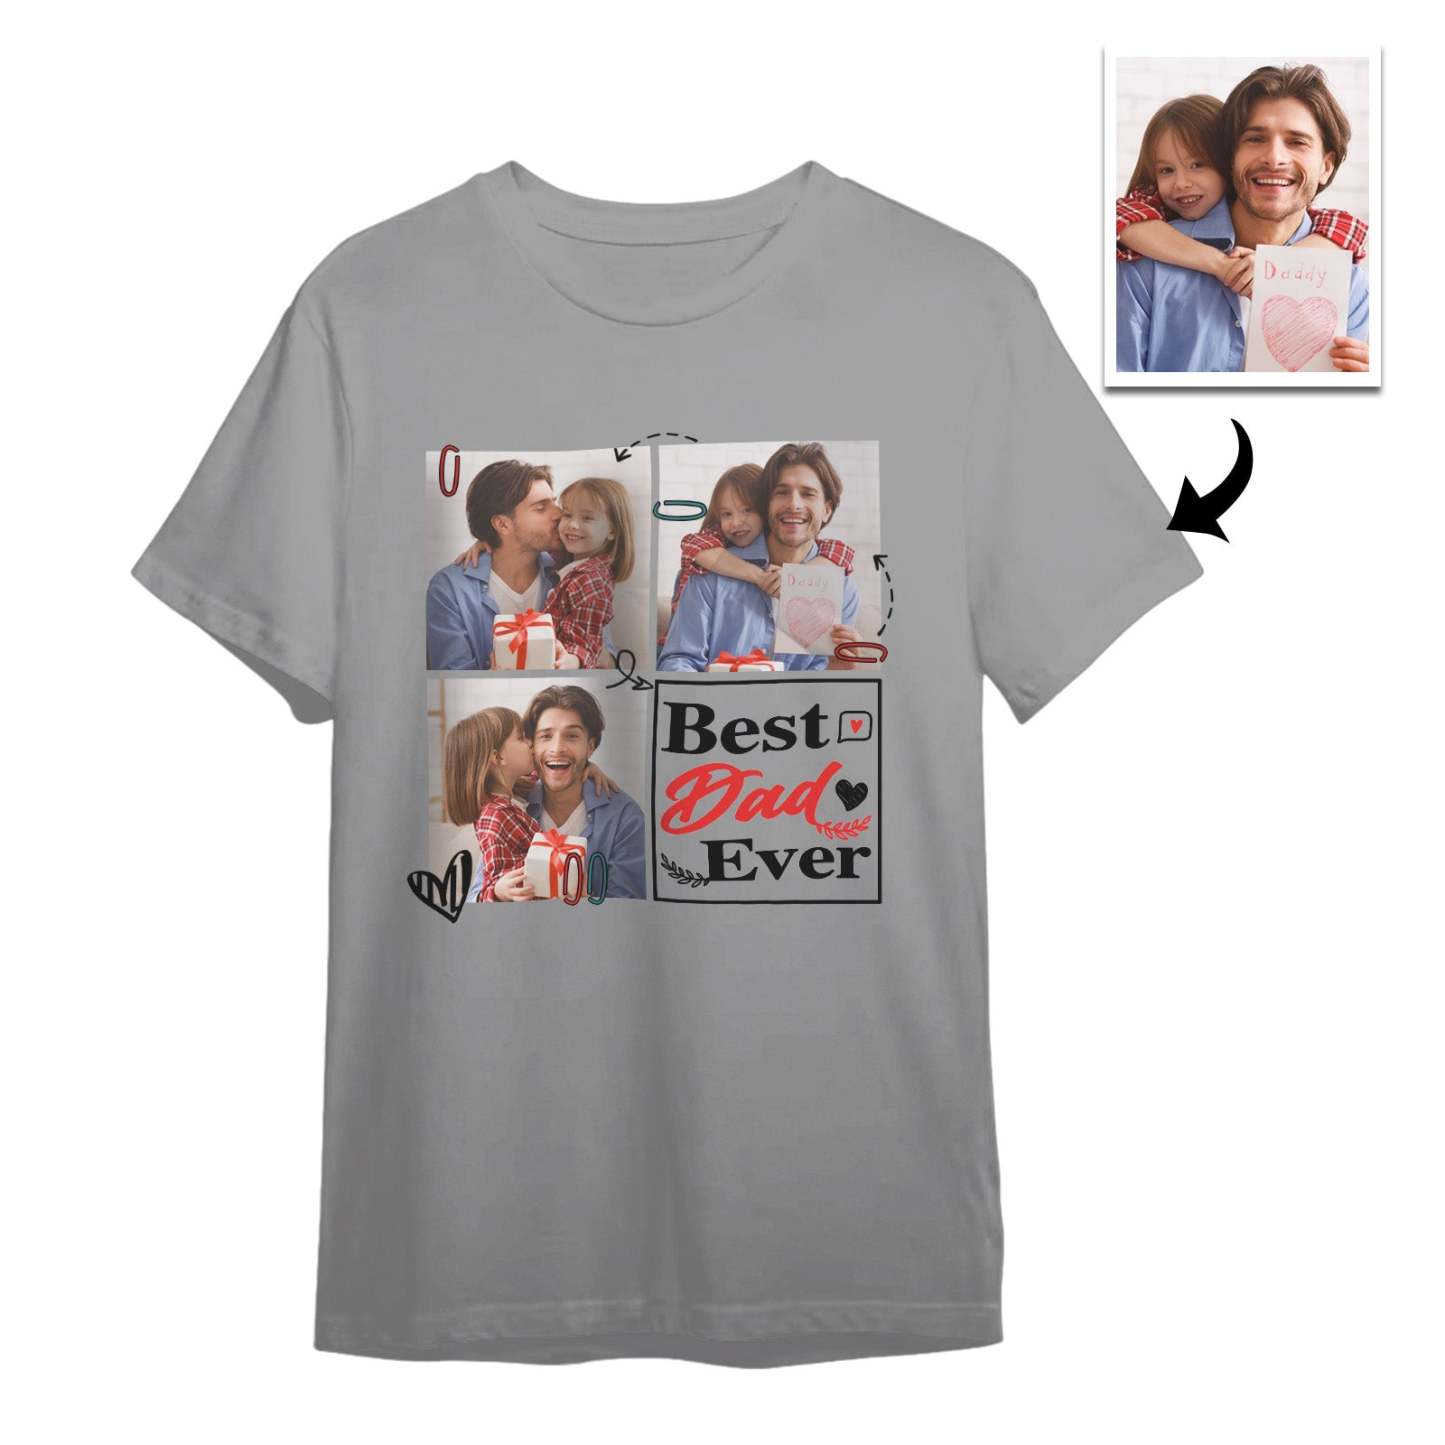 Custom 3 Photos T-Shirt Personalized Photo Men's T-Shirt Best Dad Ever Father's Day Gift Family T-Shirt